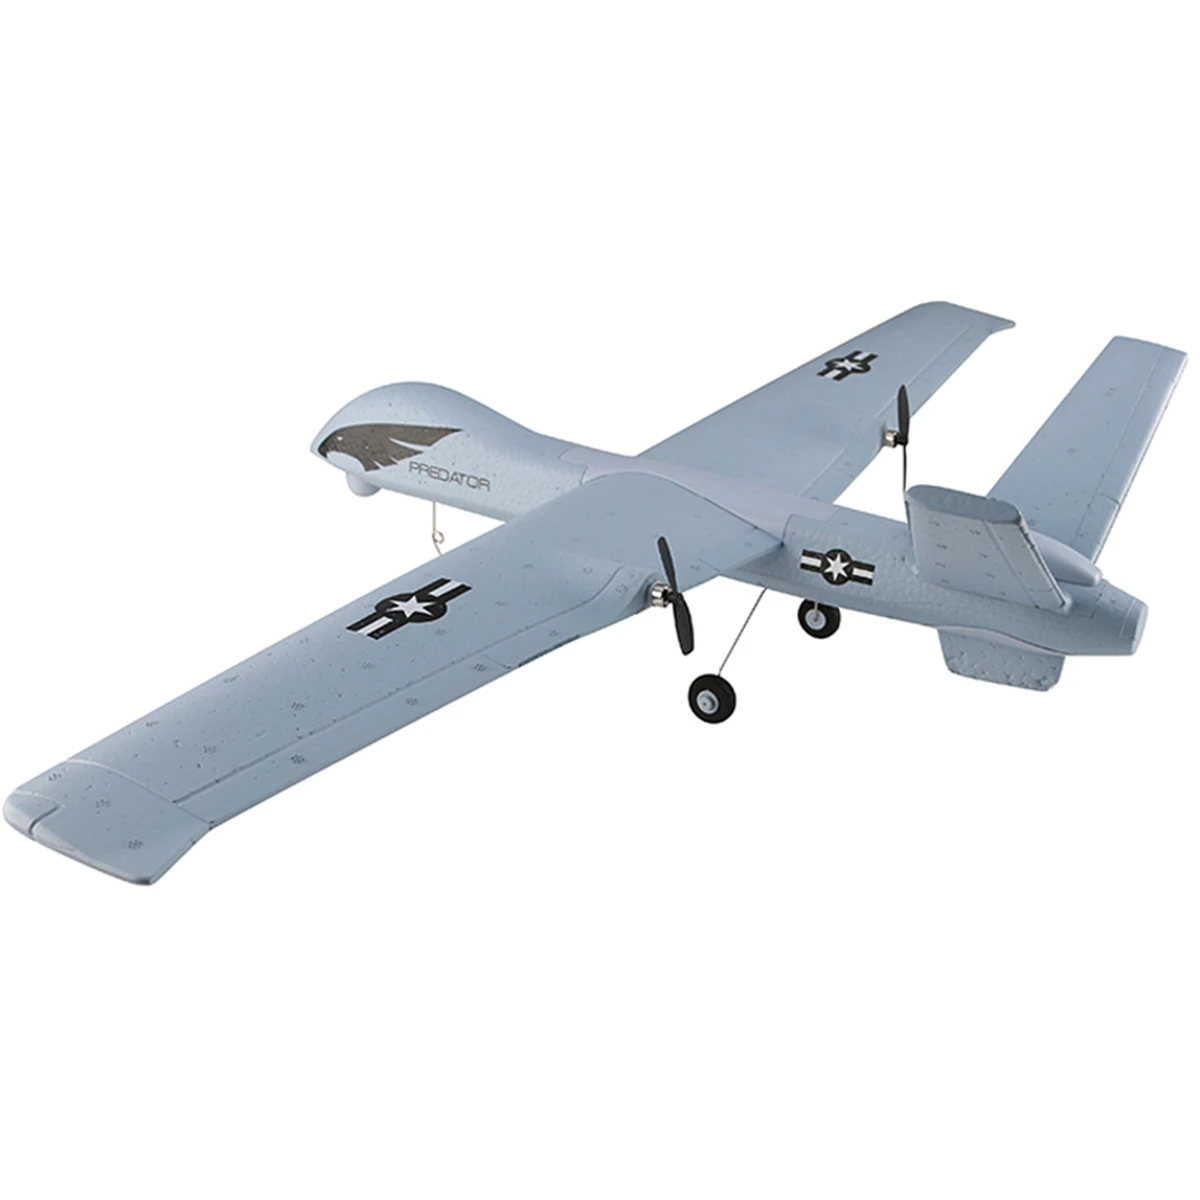 

HOSHI RC Airplane Plane Z51 Glider Remote Control 2.4G Flying Model with LED Hand Throwing Wingspan Foam Plane Toys Kids DIY KIT, Grey